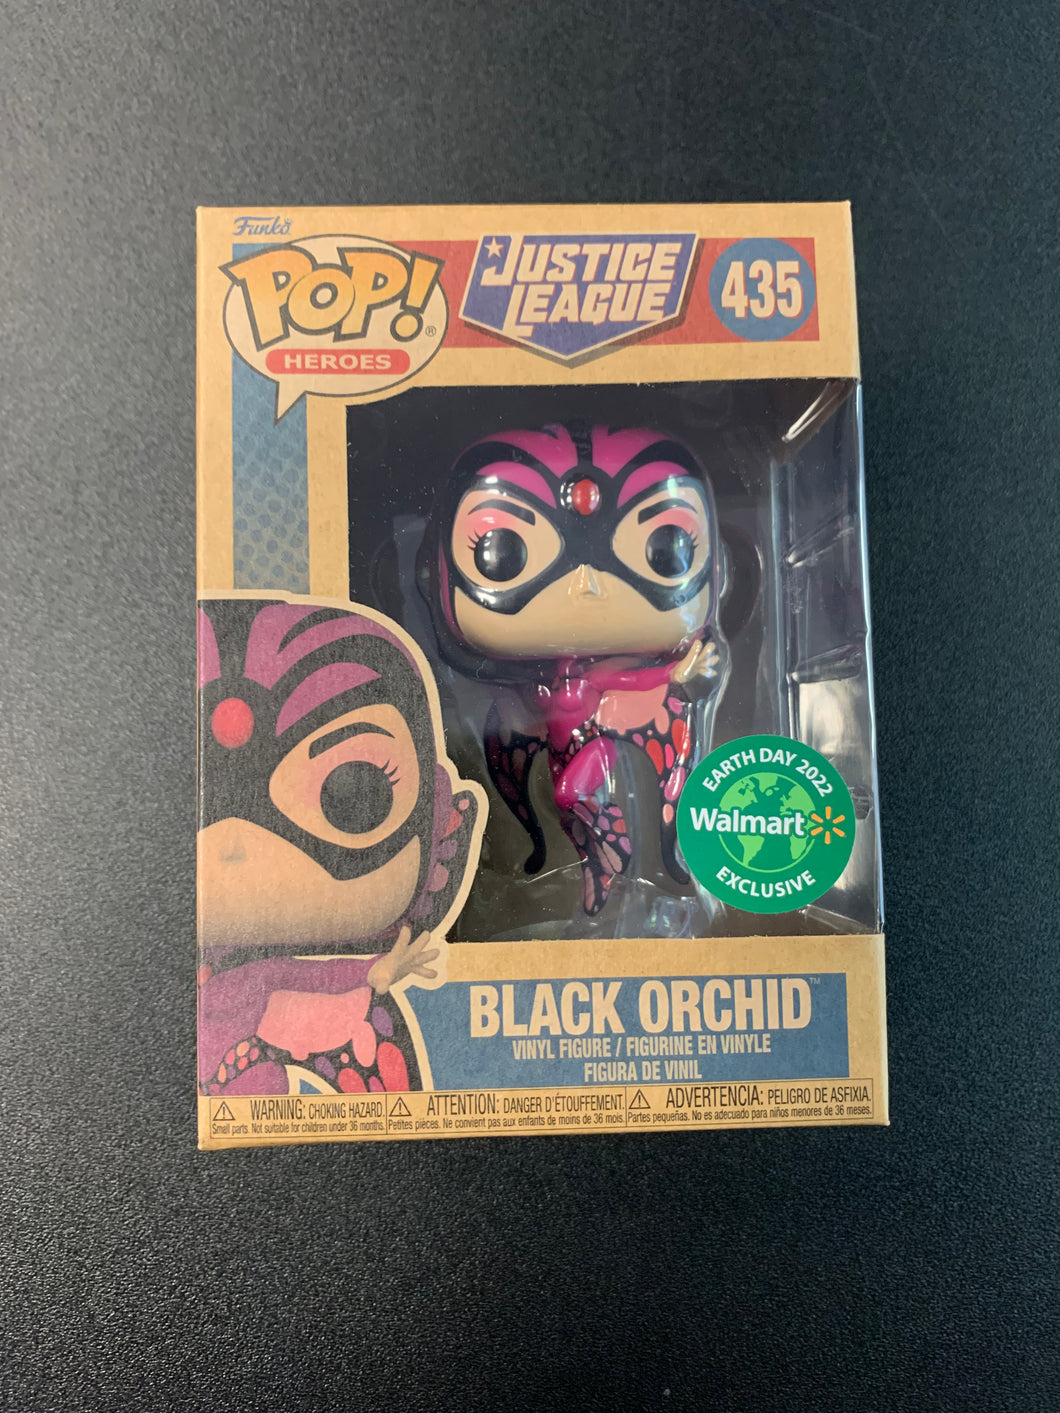 FUNKO POP HEROES JUSTICE LEAGUE BLACK ORCHID WALMART EARTH DAY 2022 EXCLUSIVE 435